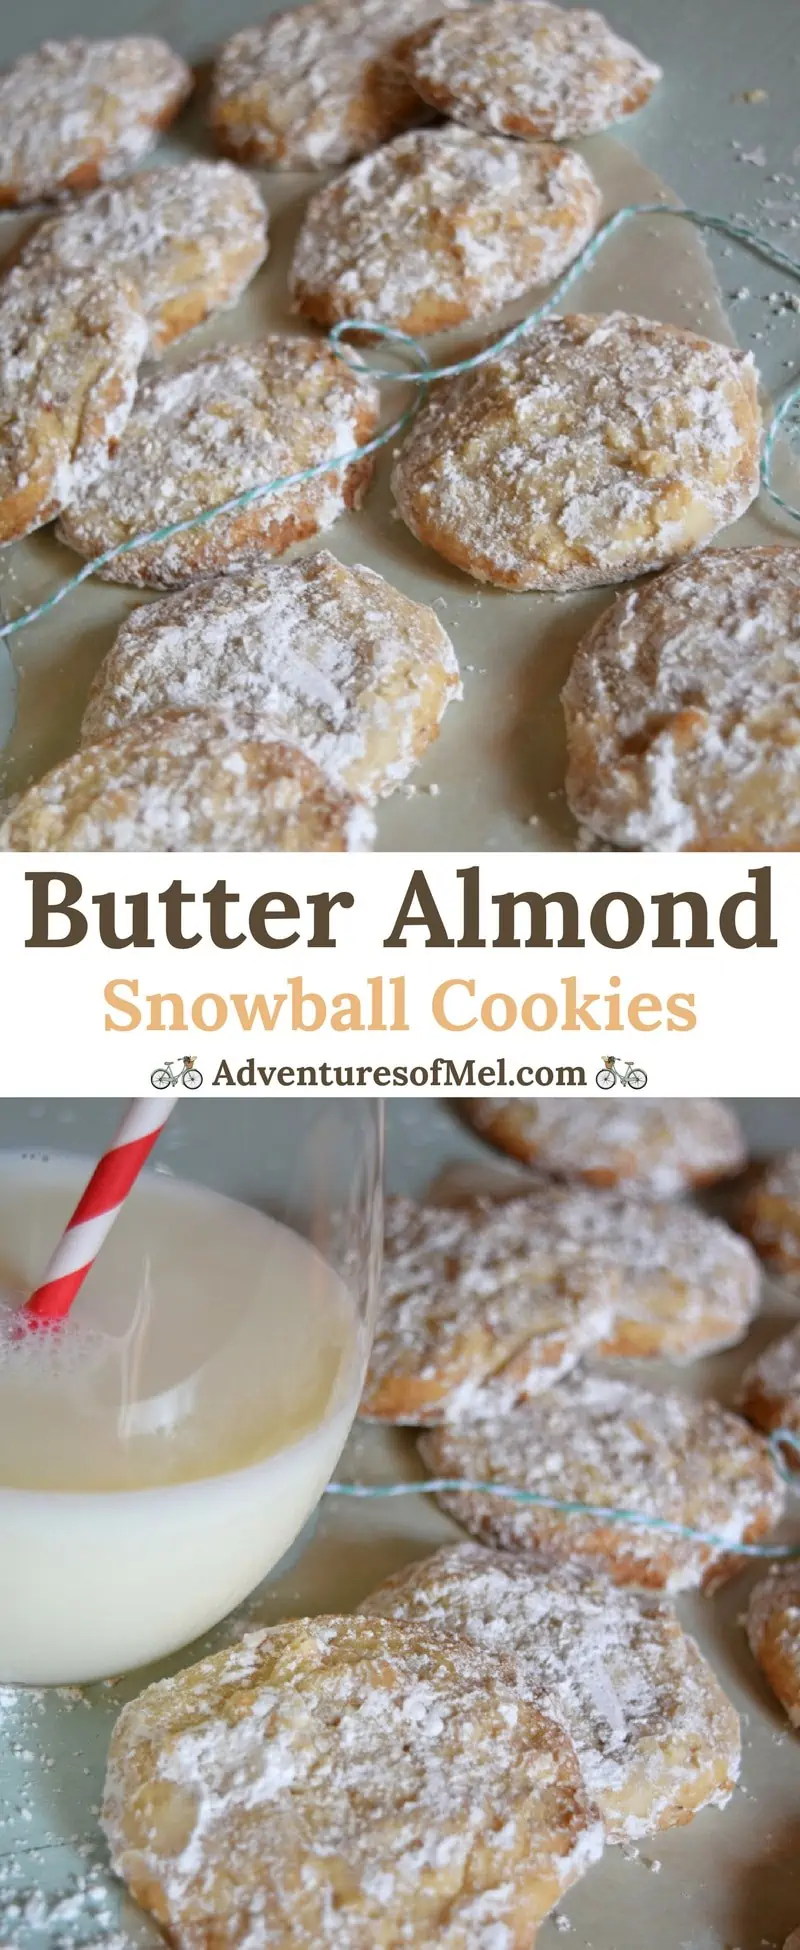 Butter Almond Snowball Cookies are one of my favorite holiday cookie recipes. Melt in your mouth deliciousness with a powdered sugar dusting. Scrumptious Christmas cookies!